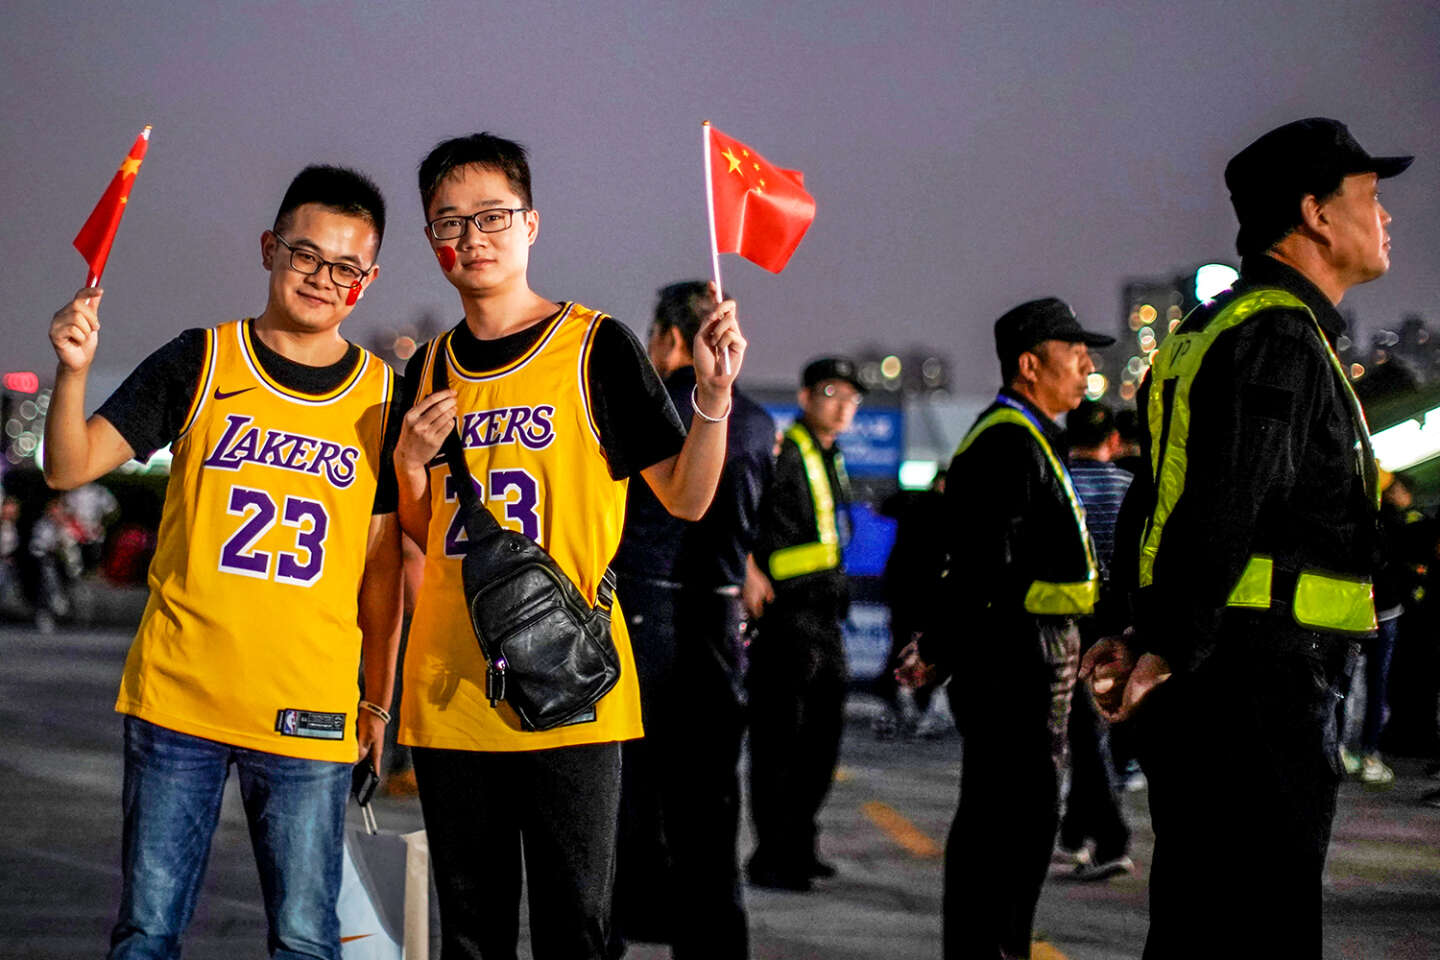 Lakers Fan -- Who's the Asian Woman?